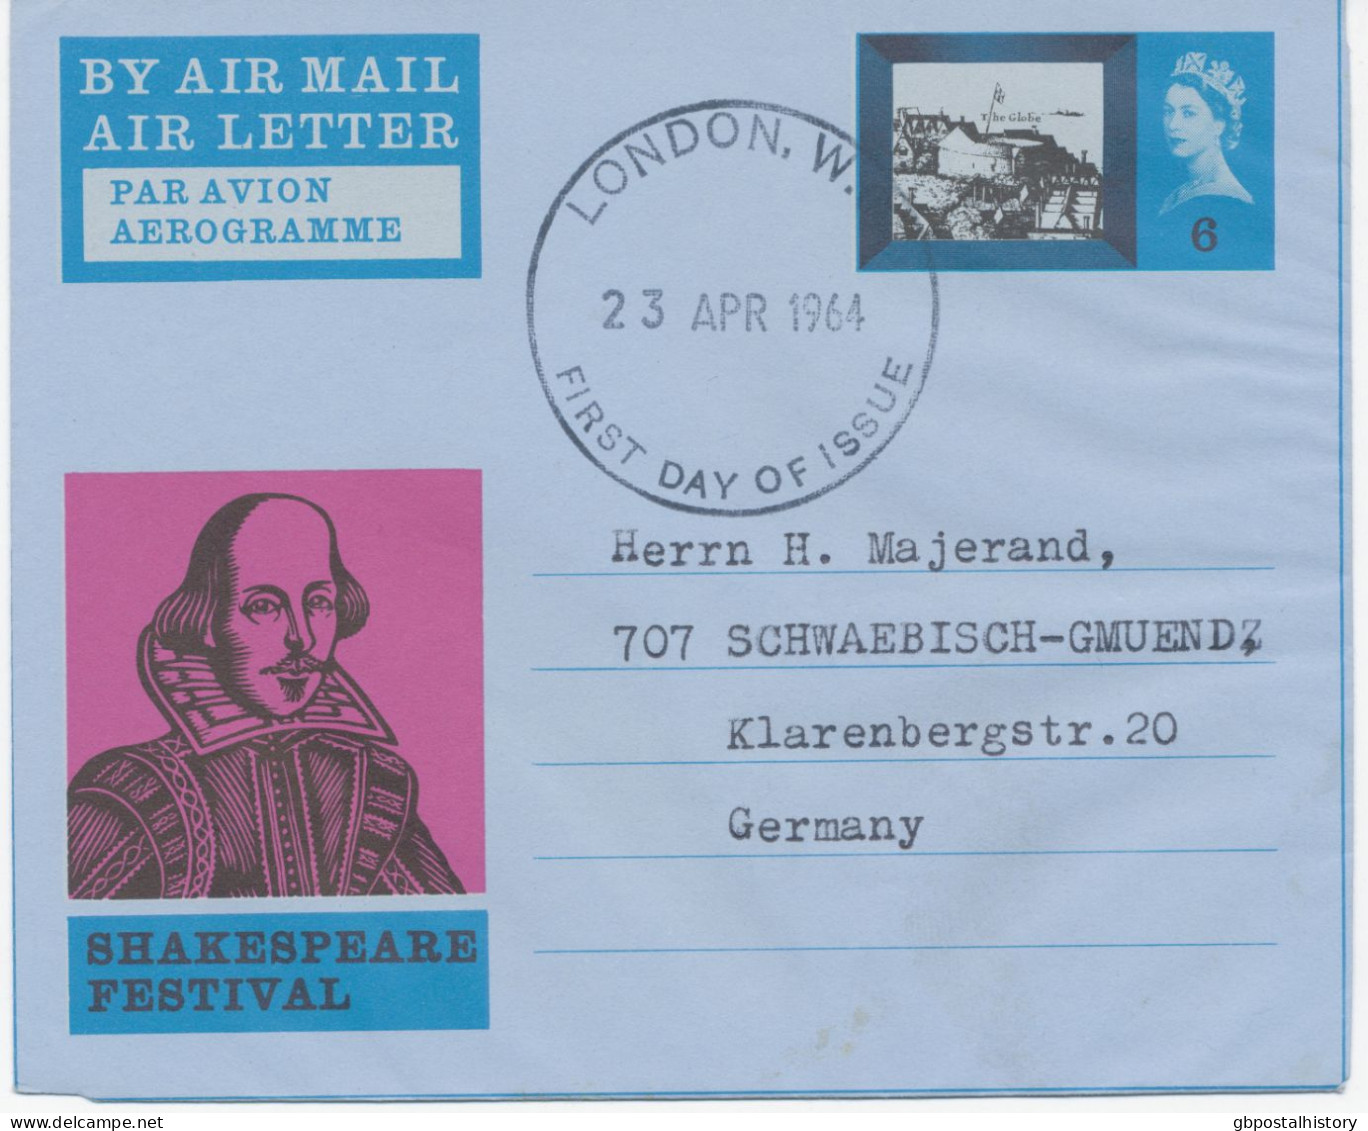 GB 23 APR 1964 SHAKESPEARE FESTIVAL 6d AIR LETTERS FDC's (BOTH!!) CDS 37mm FDI LONDON.W. / FIRST DAY OF ISSUE - Correct - Briefe U. Dokumente